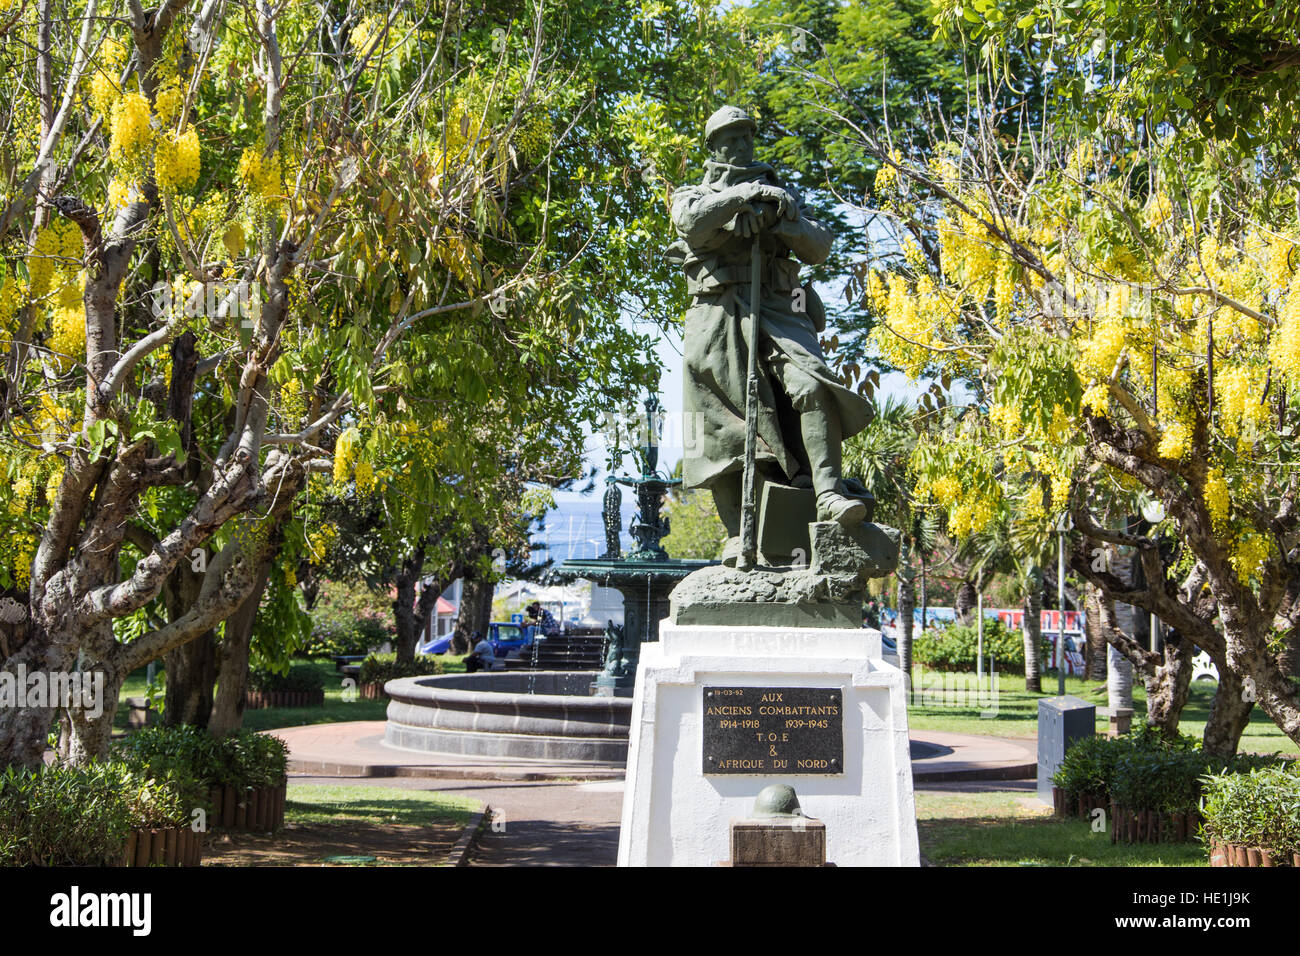 Memorial to WWI and WWII veterans, Park in front of City Hall, St Pierre, Reunion Island Stock Photo